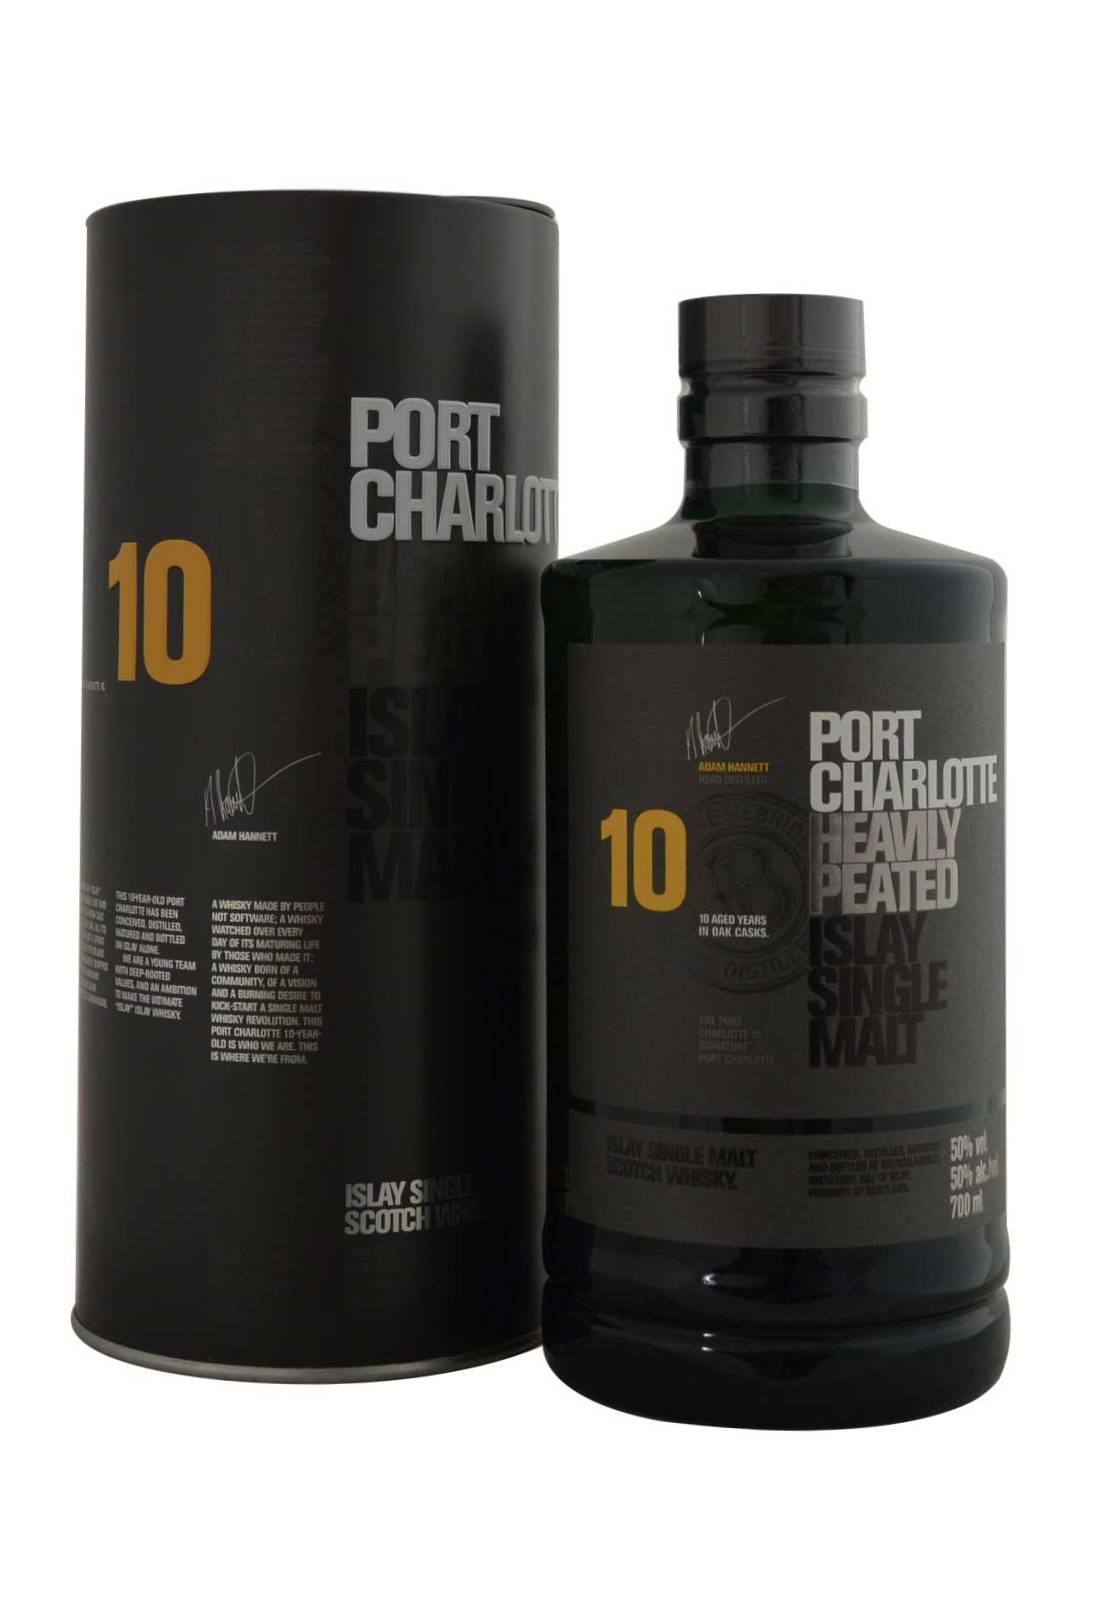 Port Charlotte Heavily Peated 10 Year Old